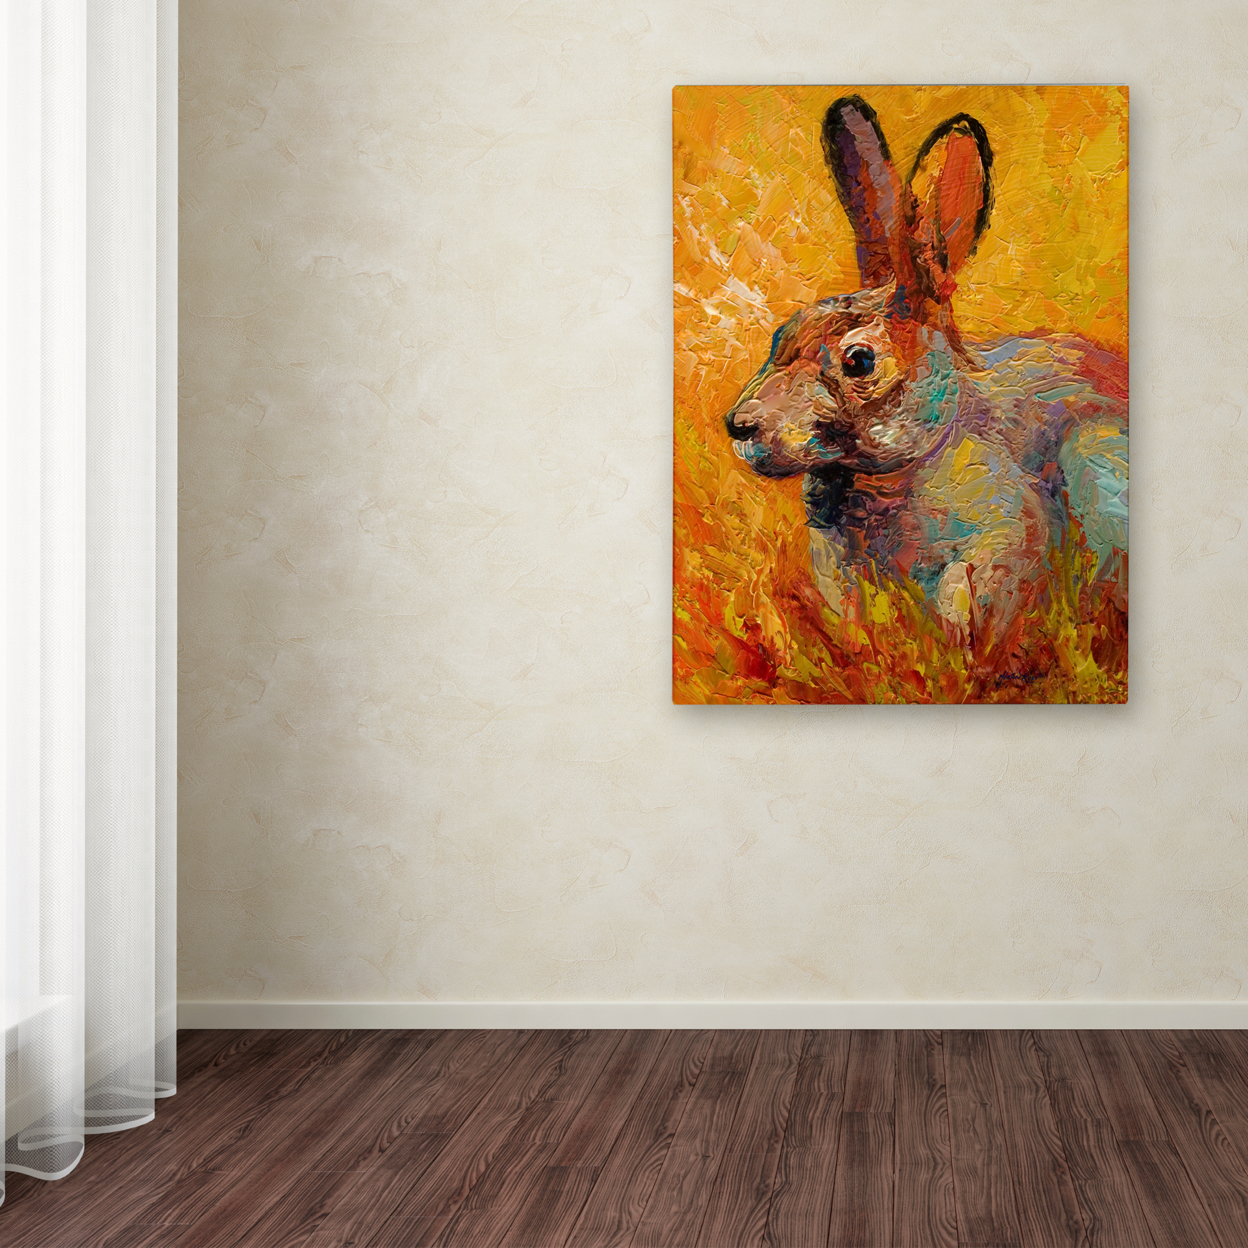 Marion Rose 'Rabbit III' Ready To Hang Canvas Art 24 X 32 Inches Made In USA